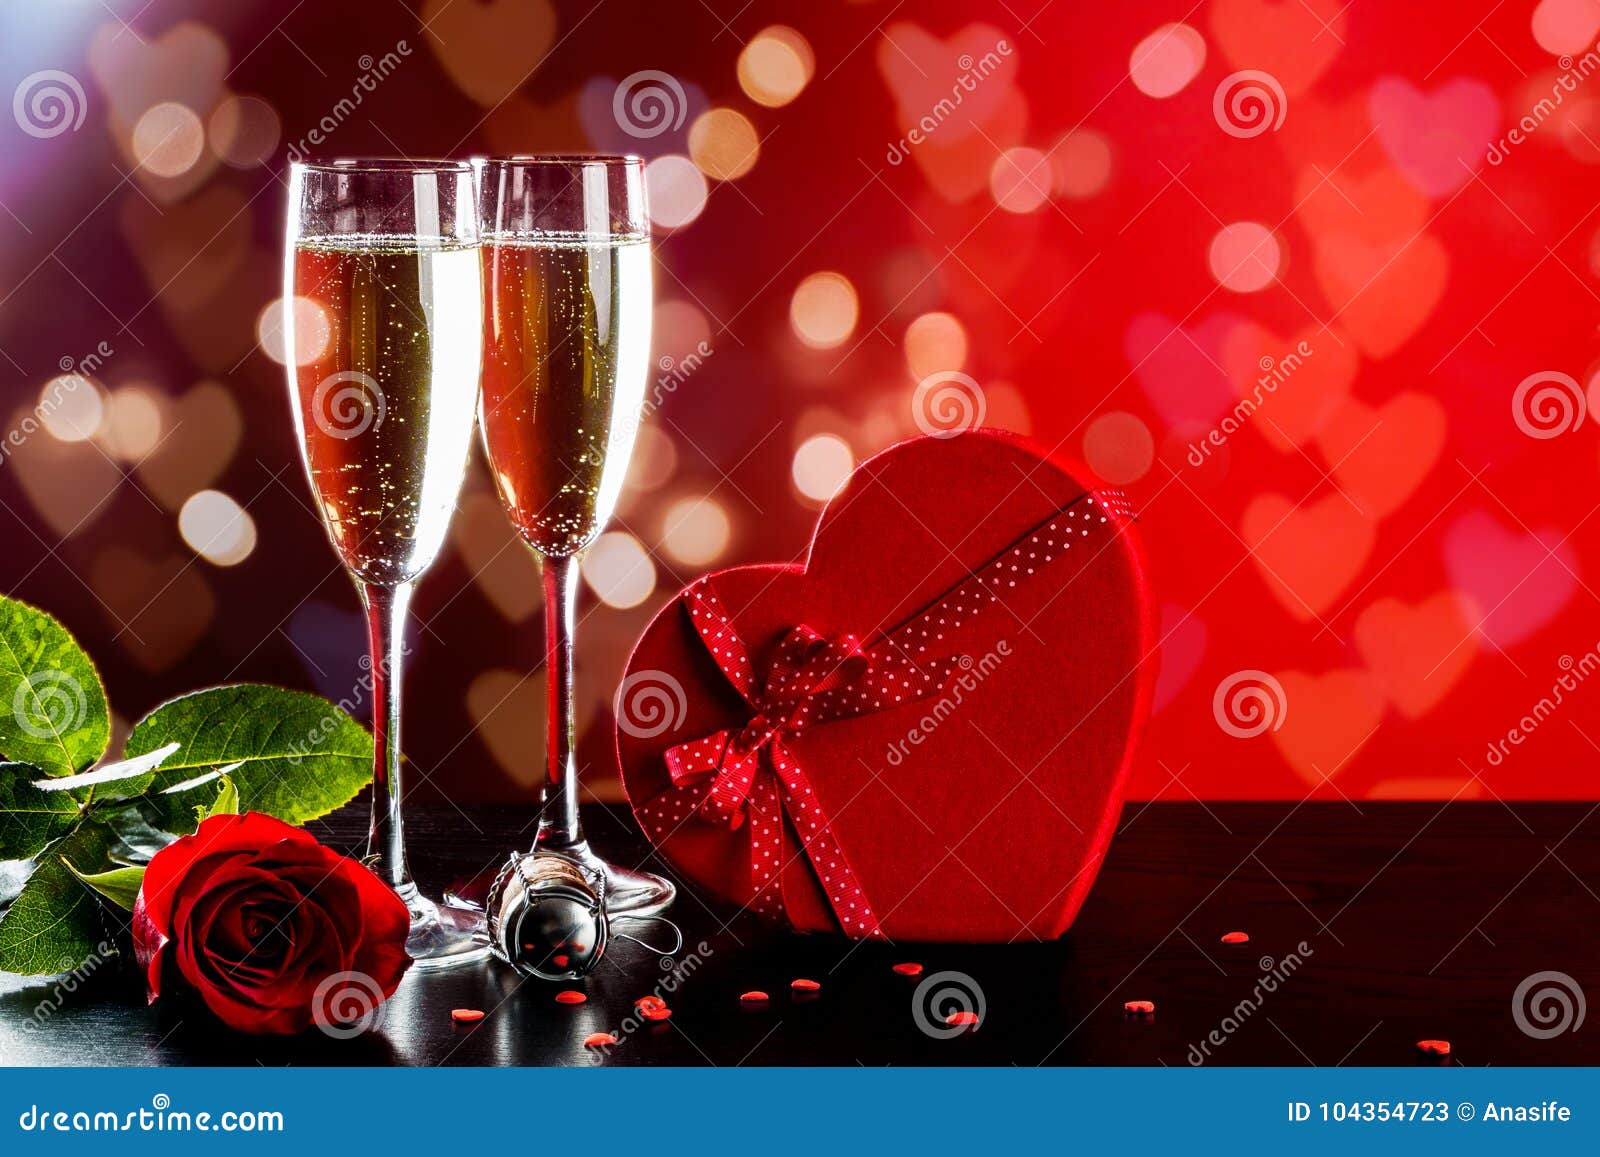 valentines day background with champagne